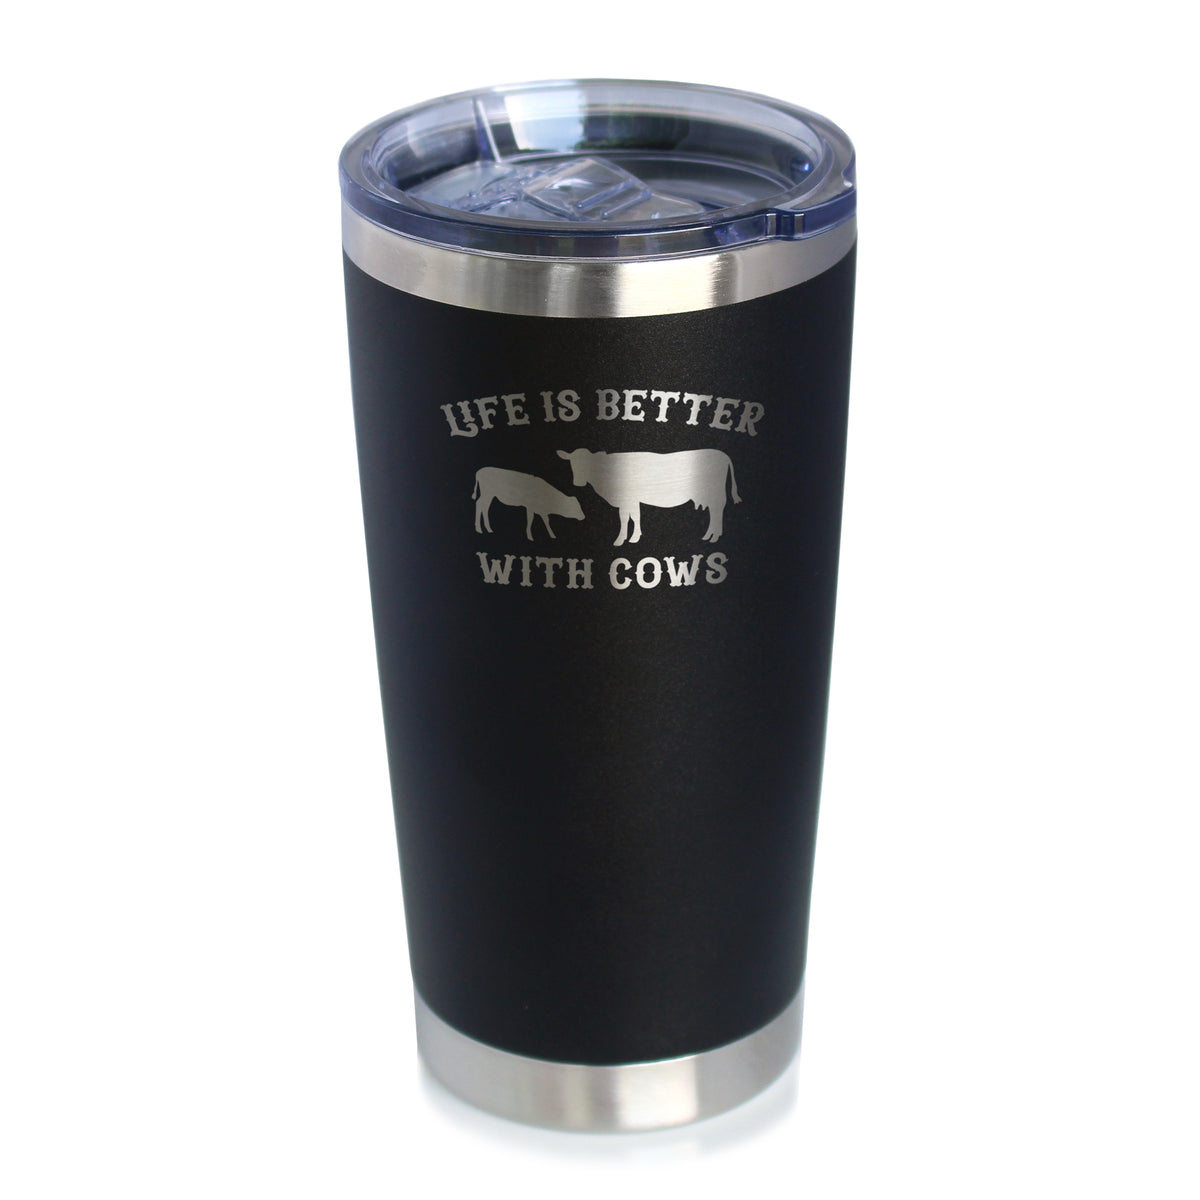 Life is Better With Cows - Insulated Coffee Tumbler Cup with Sliding Lid - Stainless Steel Travel Mug - Cow Gifts for Women and Men Ranchers